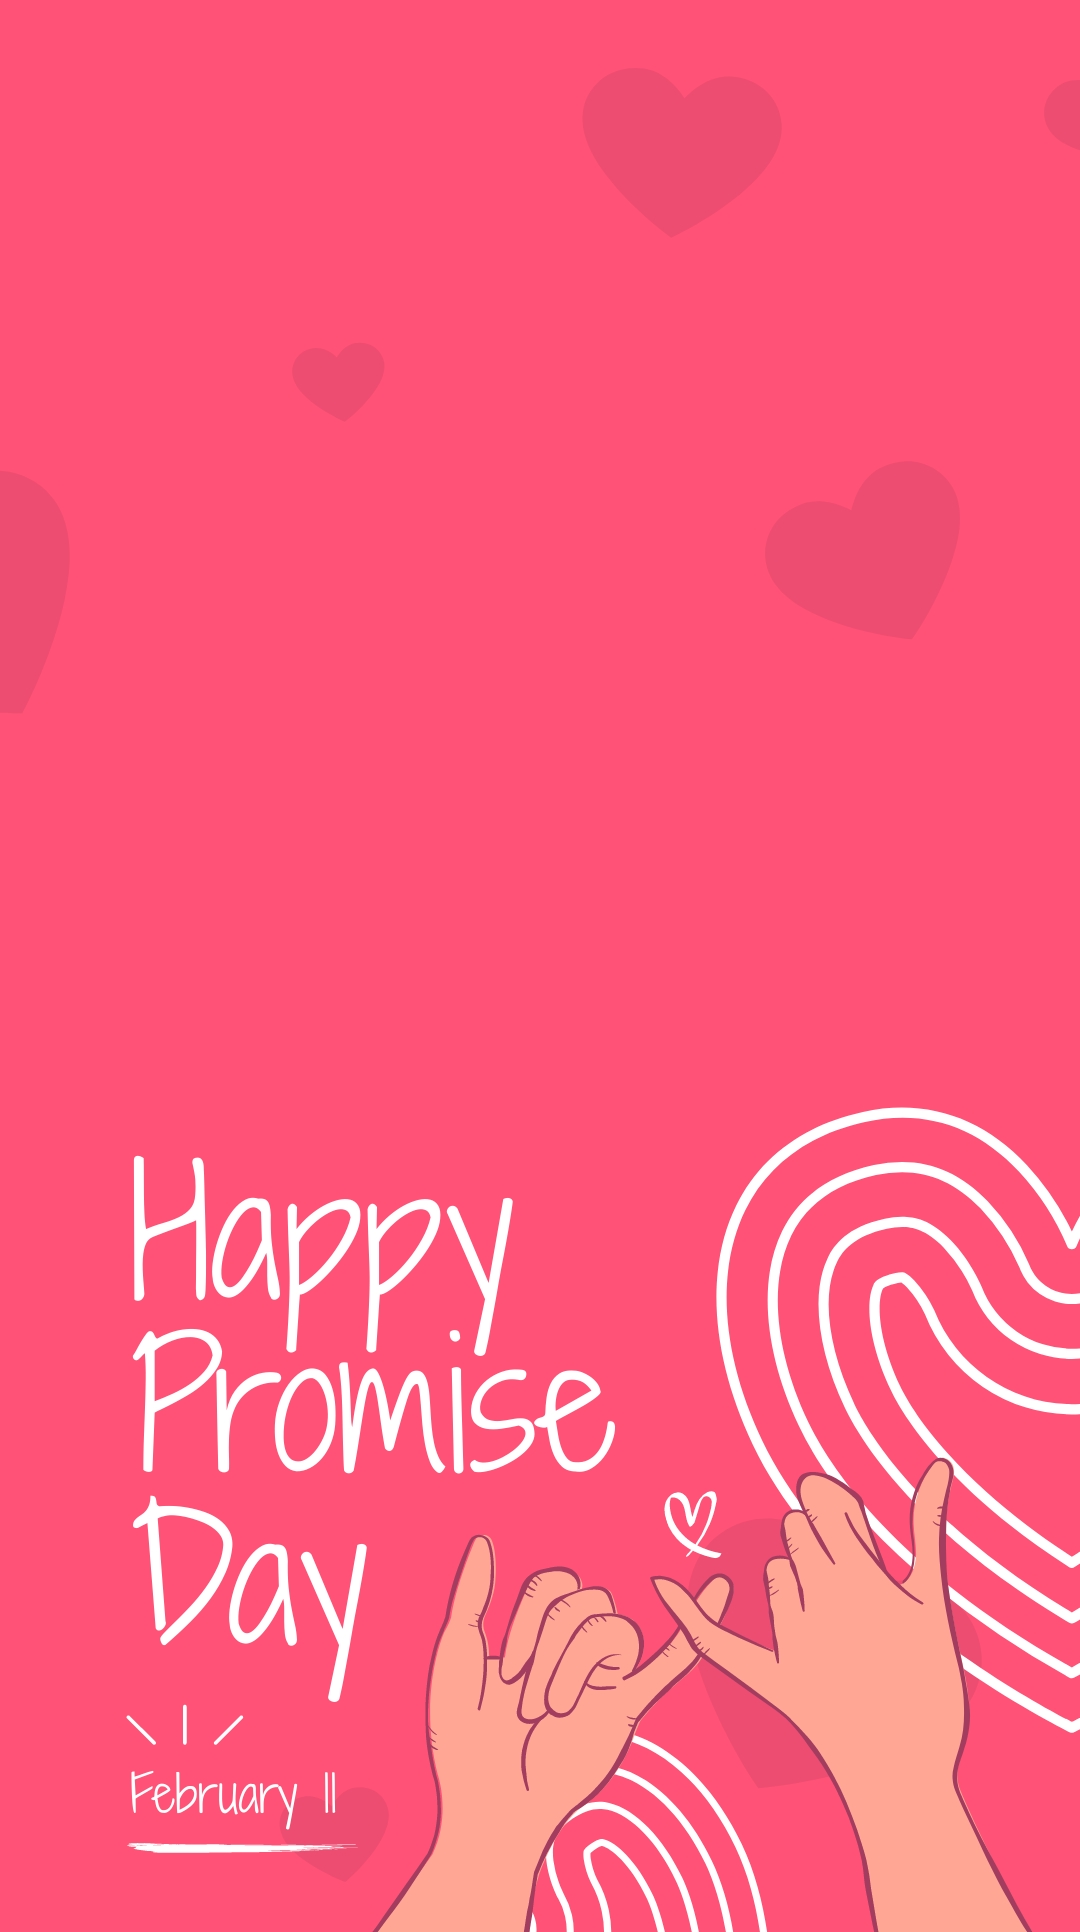 Happy Promise Day Snapchat Geofilter